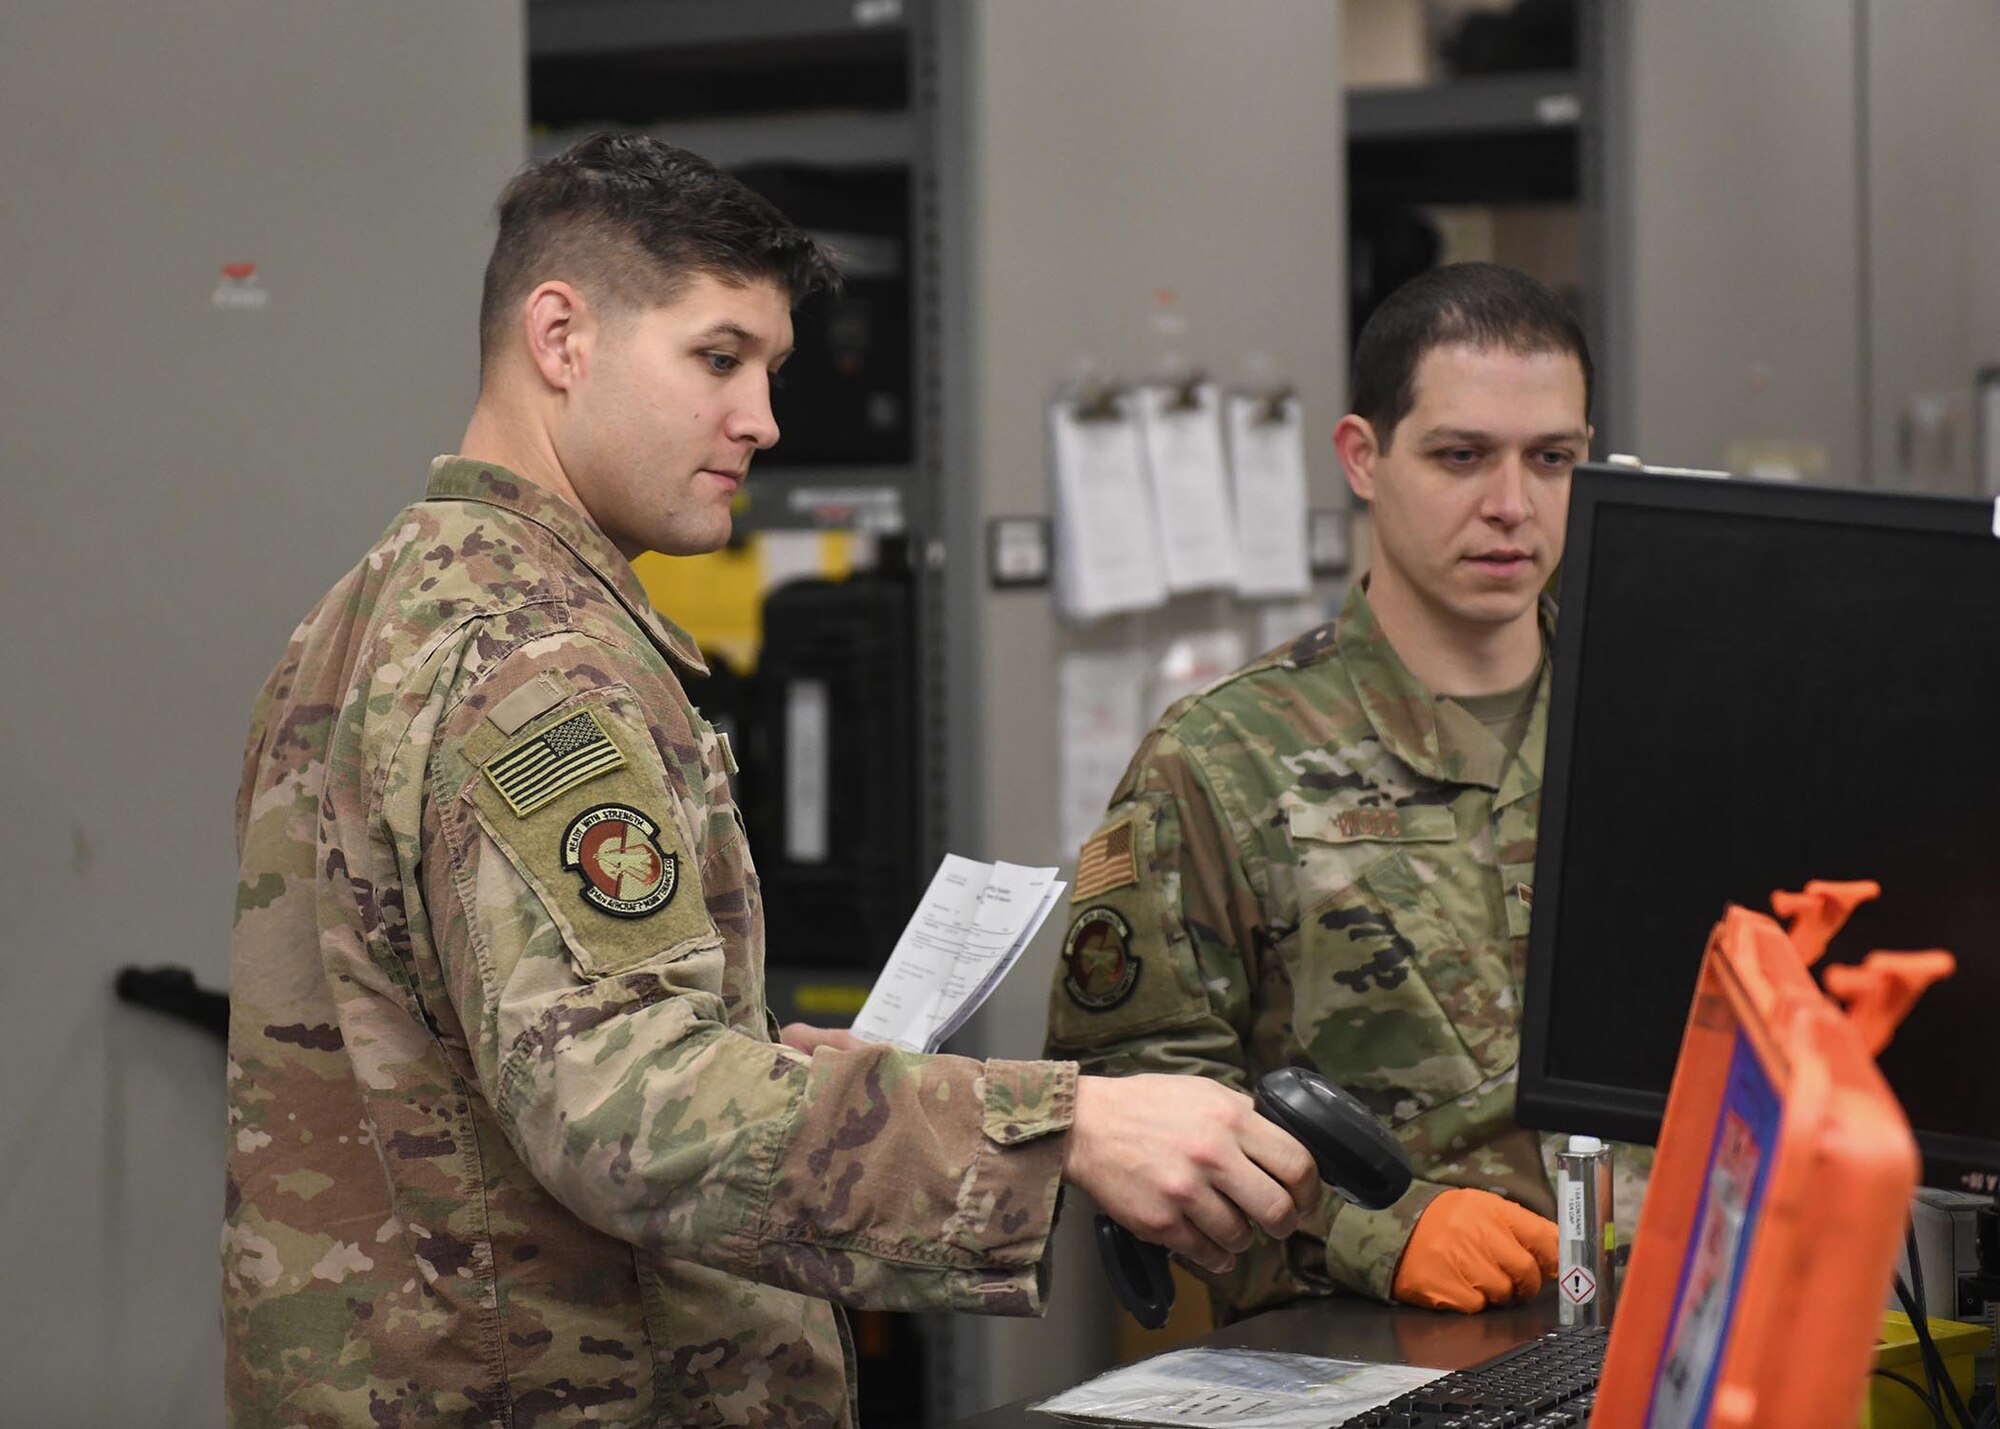 Two Airmen look at a computer screen.